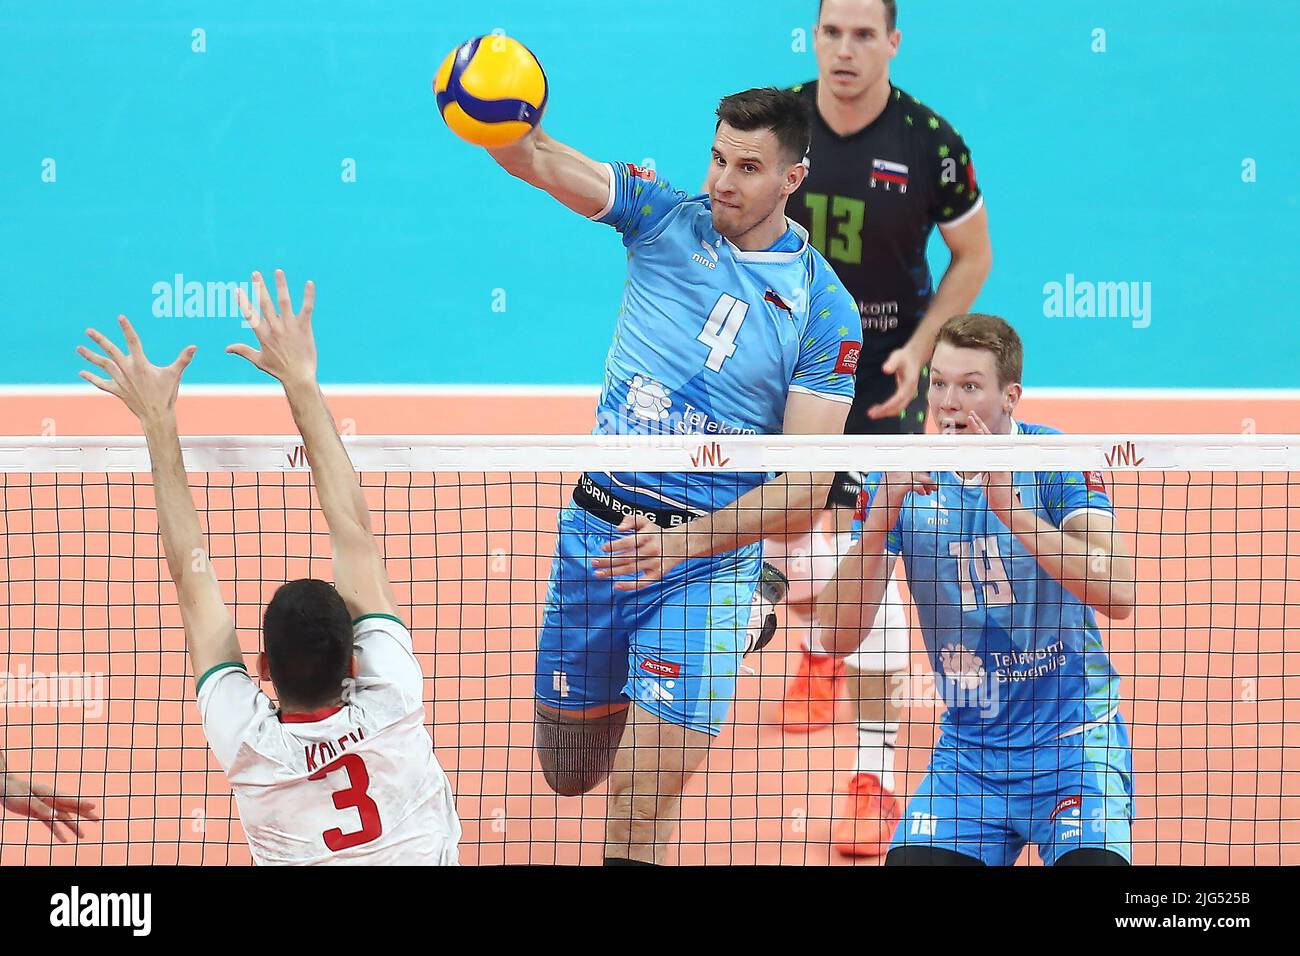 Volleyball men's world championship 2022 in Poland and Slovenia: Preview  and schedule, how to watch games